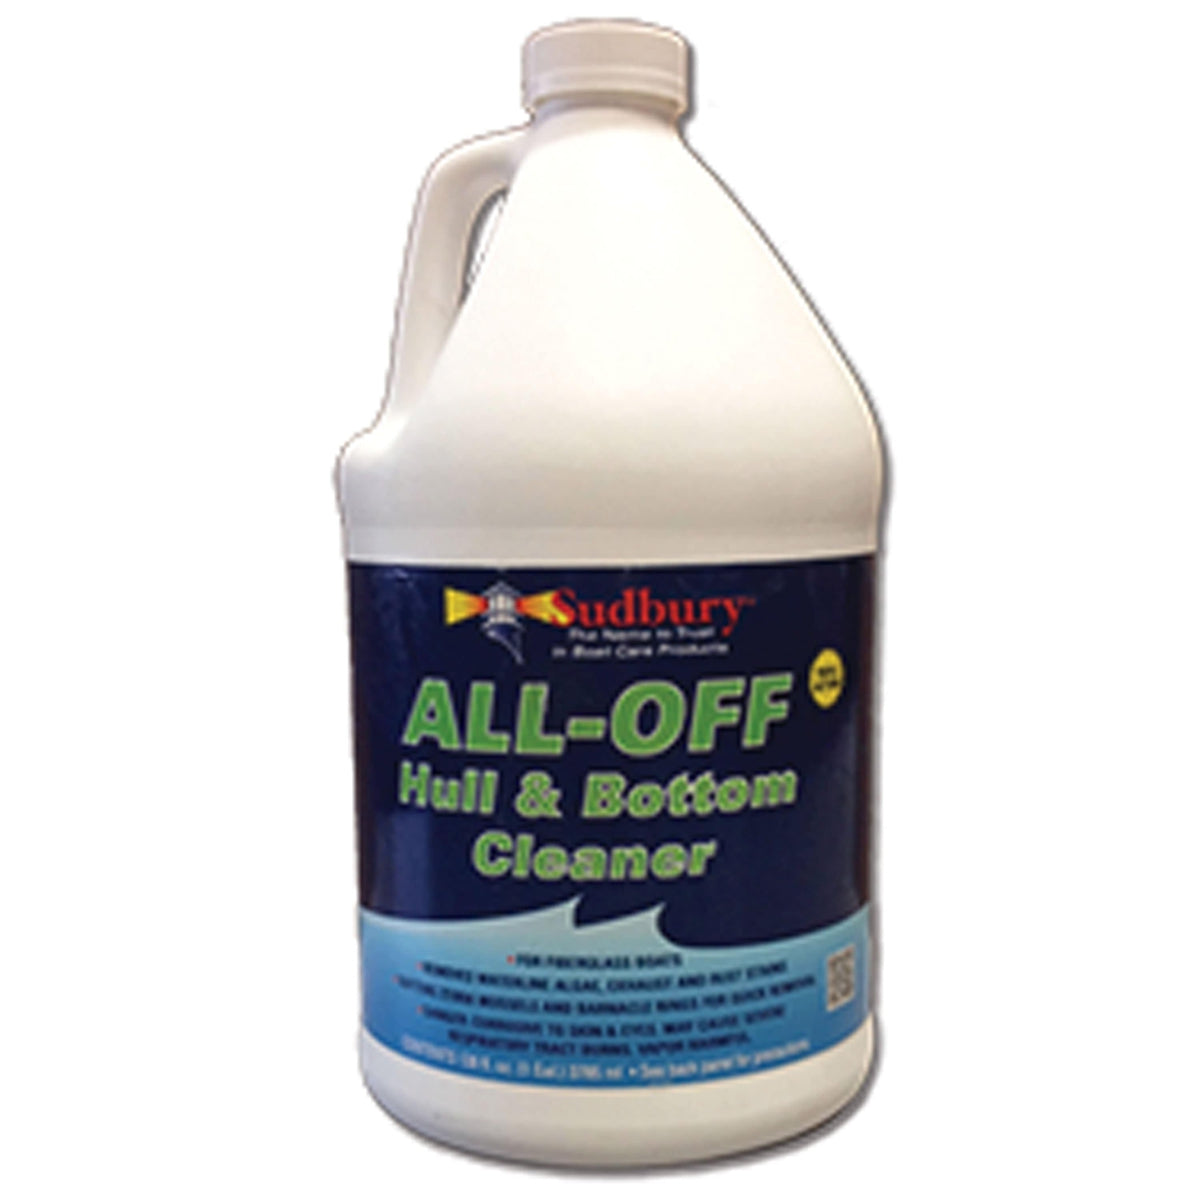 Sudbury All-Off Hull and Bottom Cleaner 1-Gallon #20128